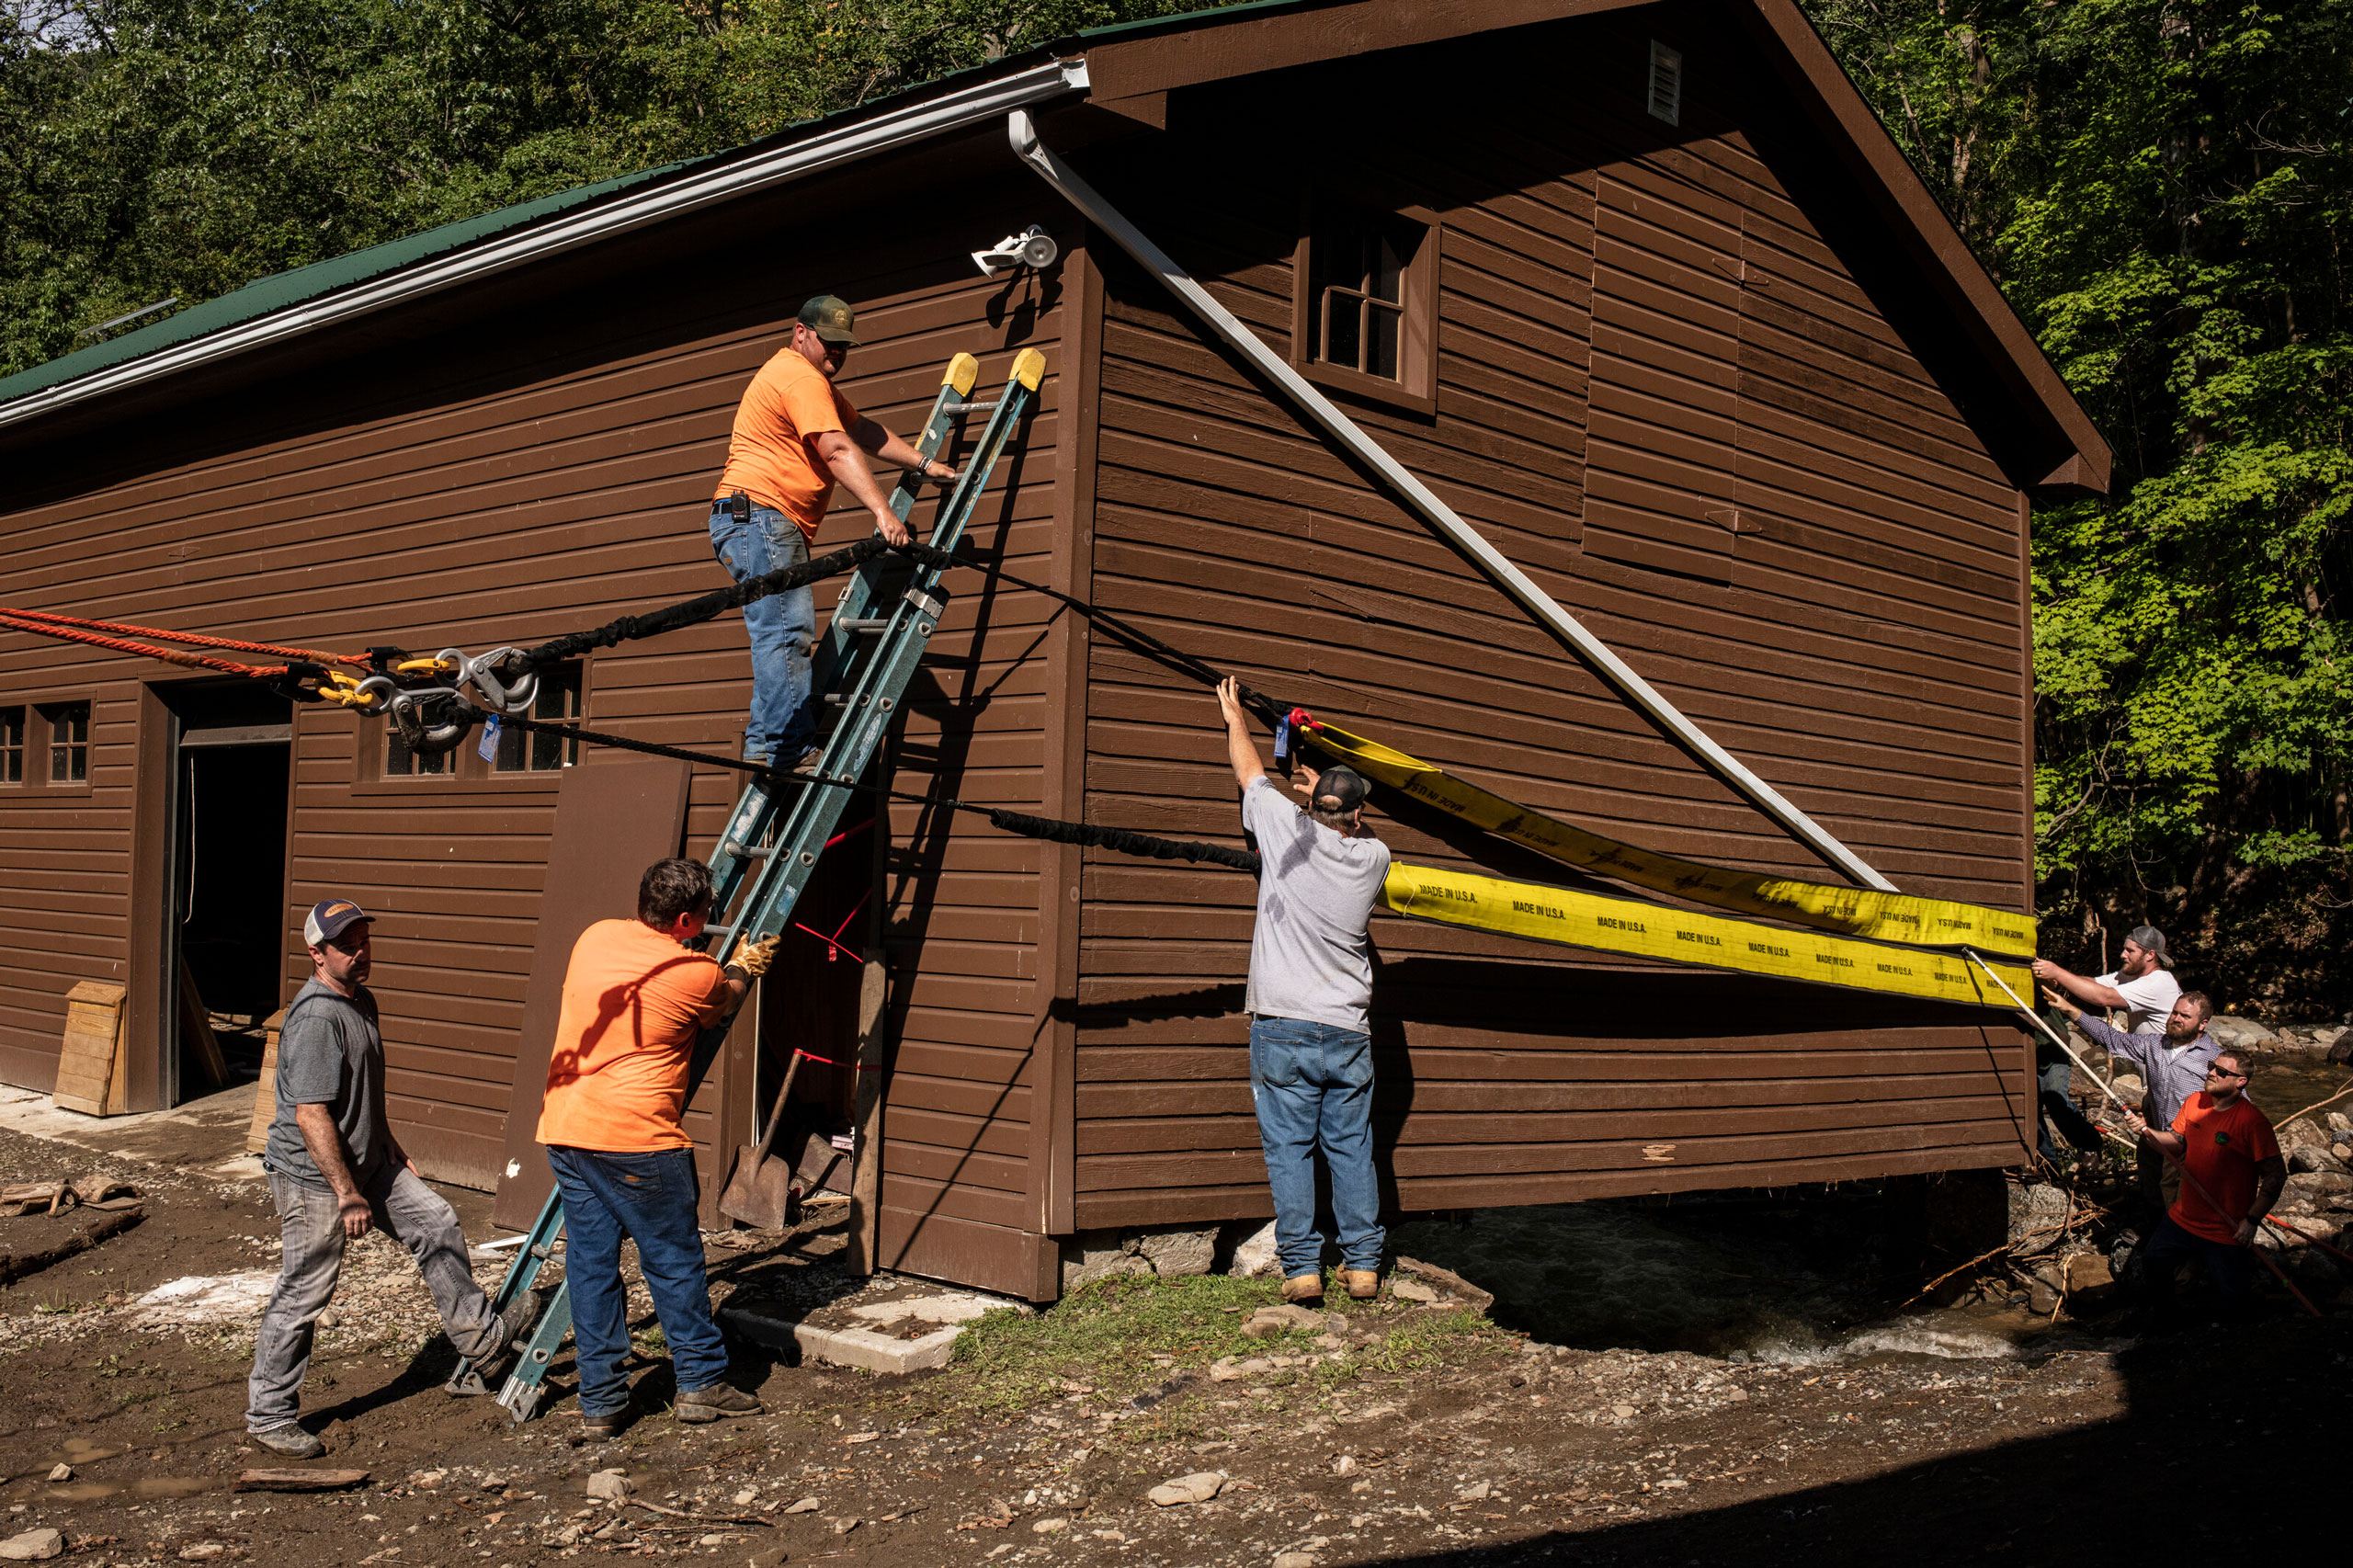 Workers prepare to move a building out of the creek after flash flooding left damage in Black Rock Forest in Cornwall, N.Y., on July 10, 2023. (Bryan Anselm—The New York Times/Redux)